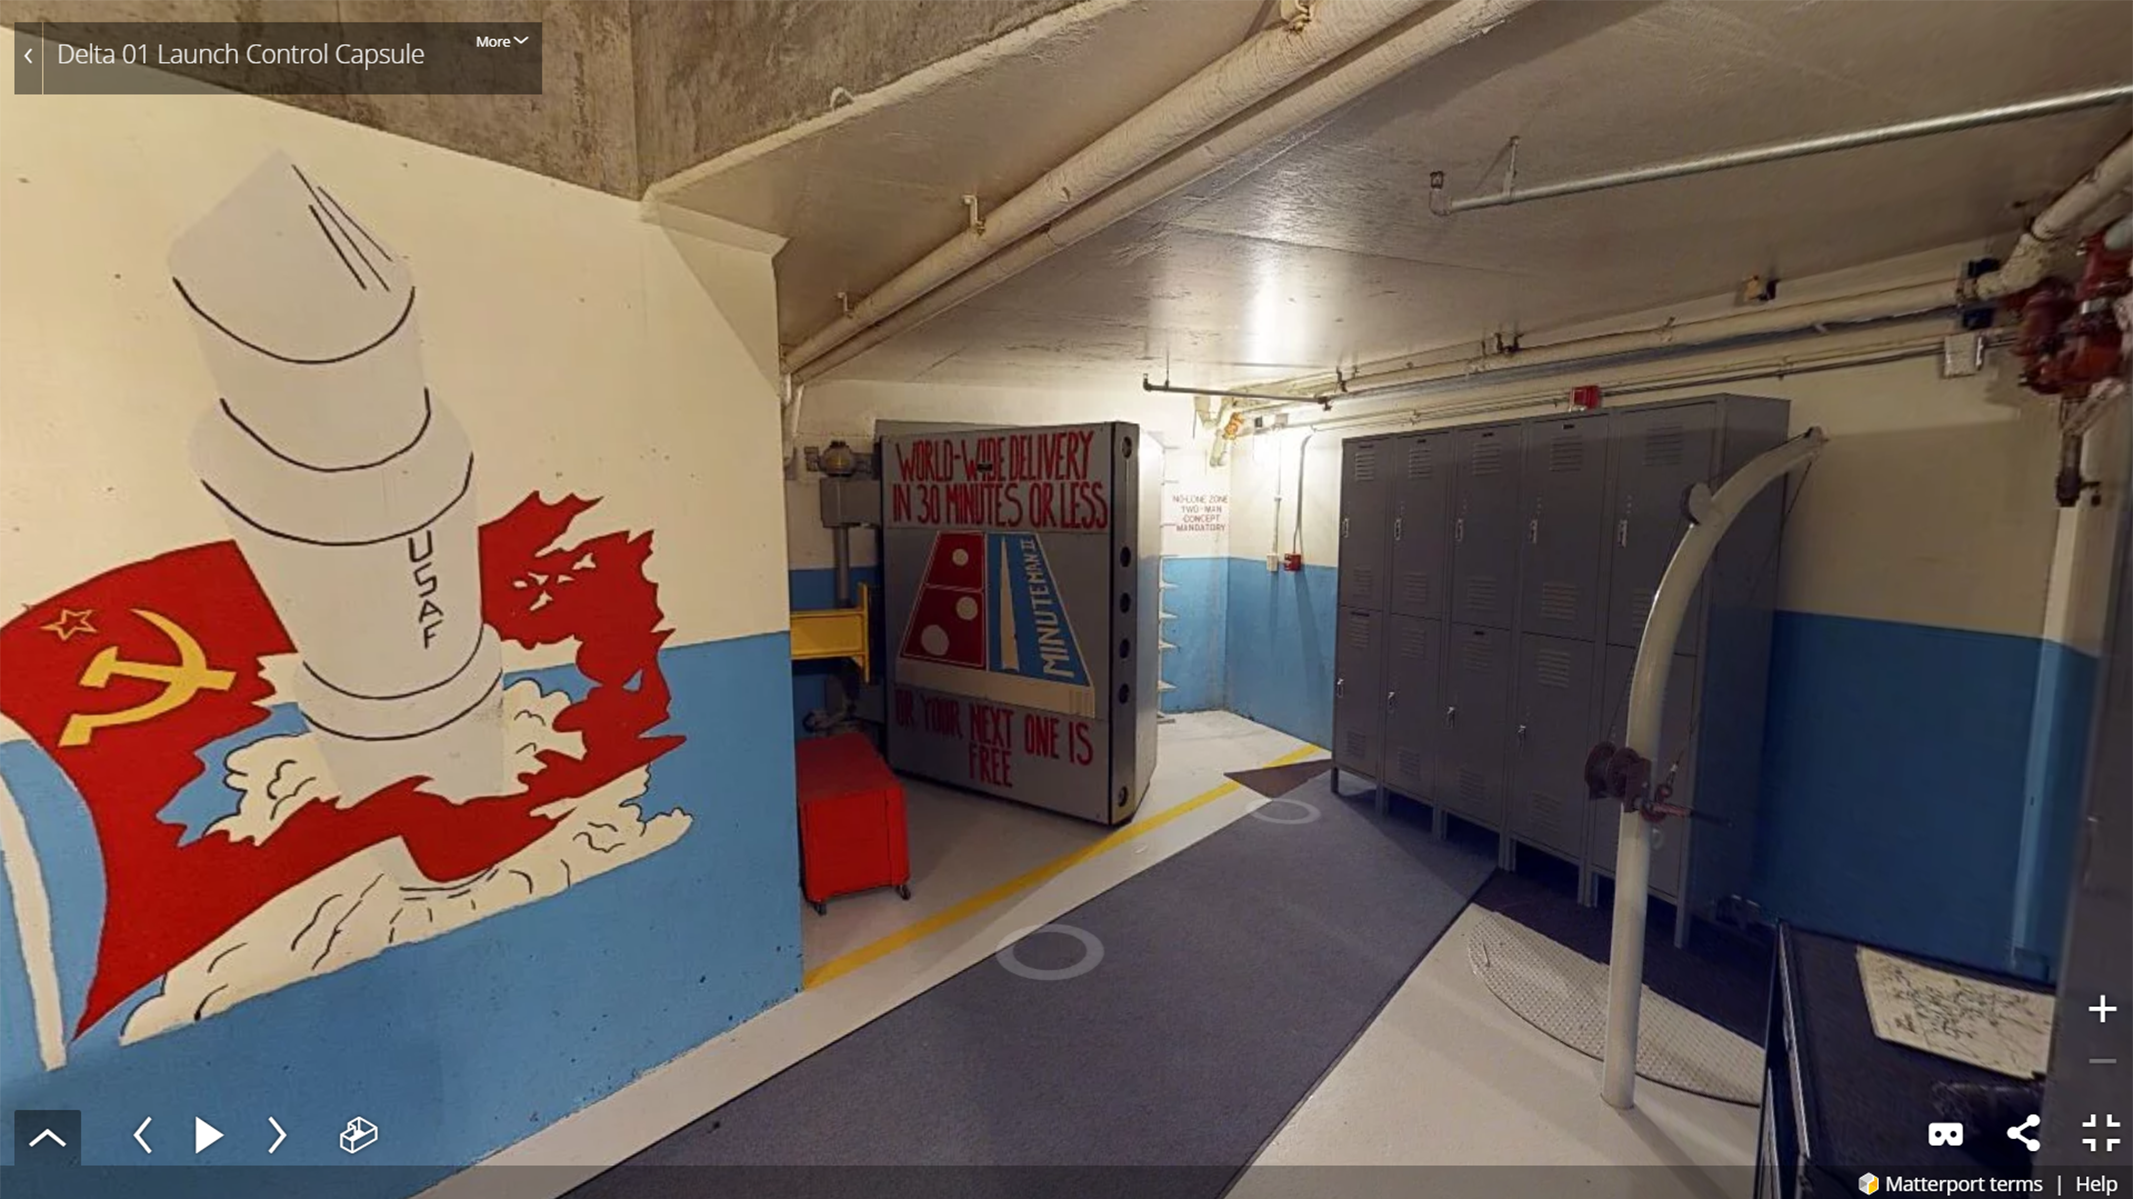 Screenshot of virtual tour showing an underground space